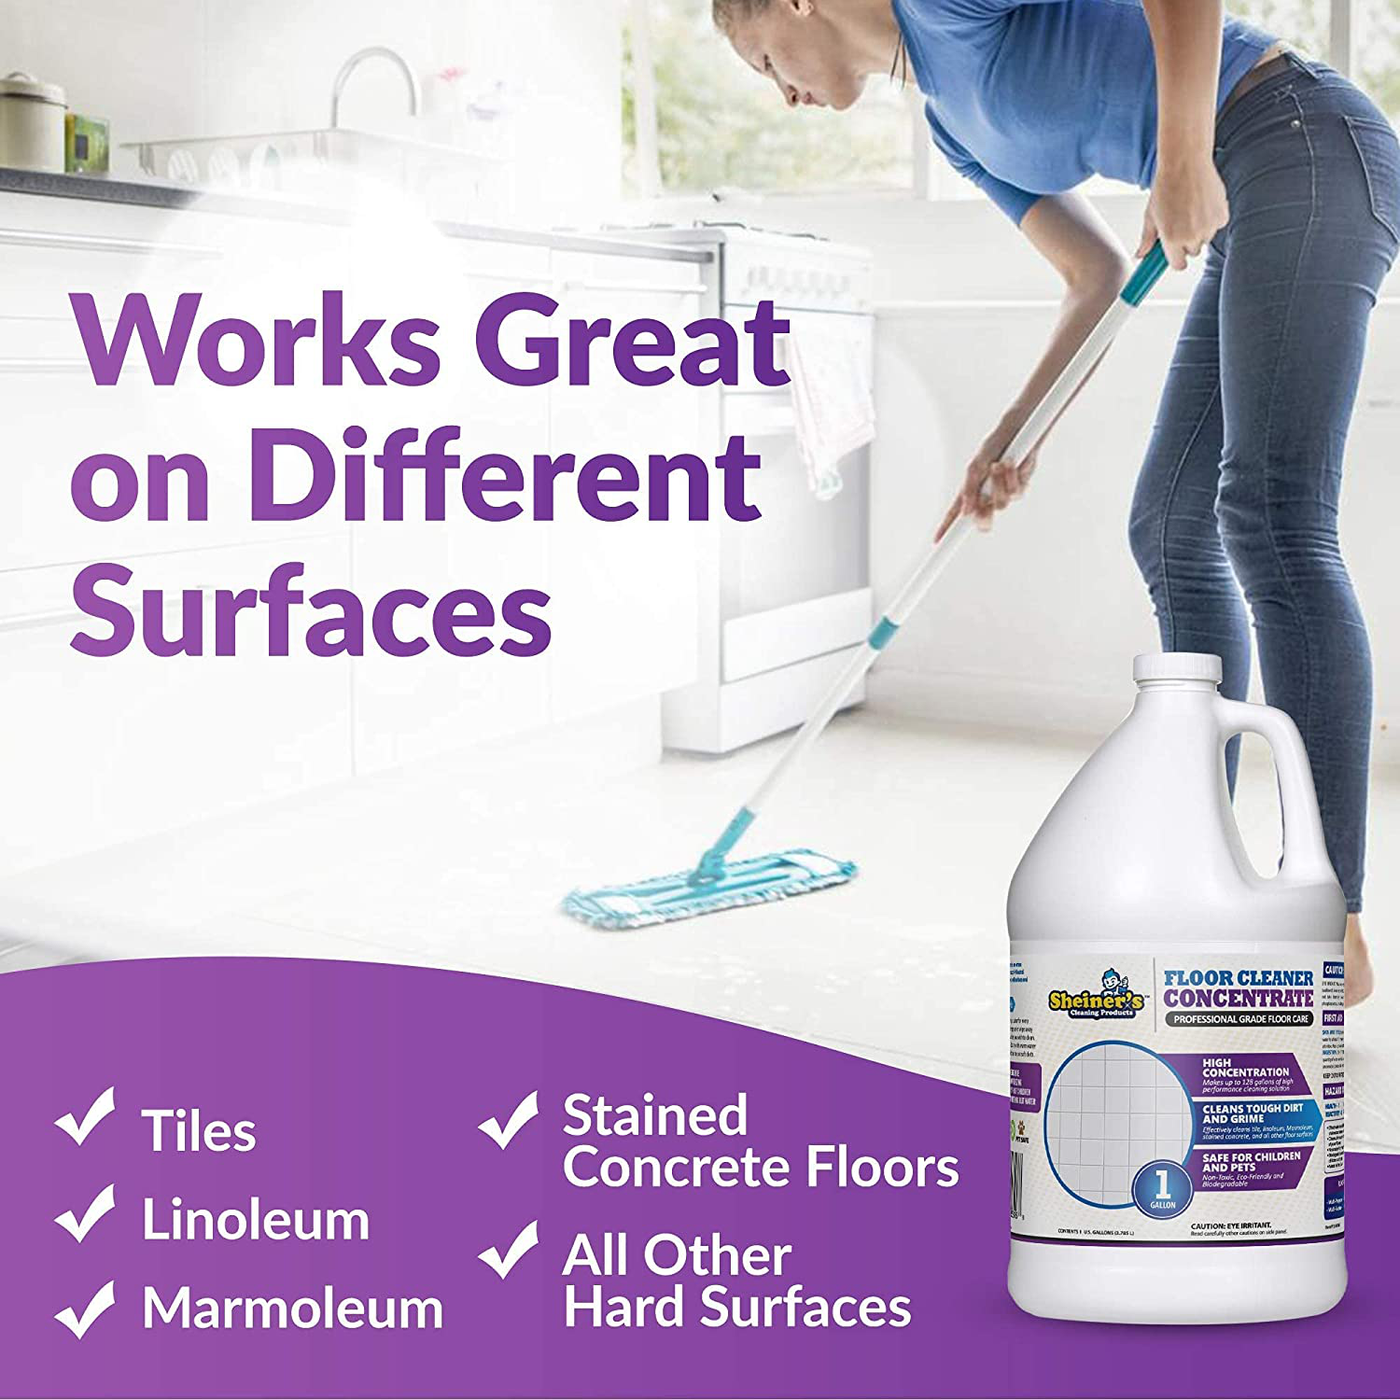 All Purpose Cleaner and Floor Cleaner Concentrate, Multi-Surface Cleaner for Home Office and Kitchen Floor, Concentrated Multipurpose Cleaner, 1 Gallon - Sheiner’s